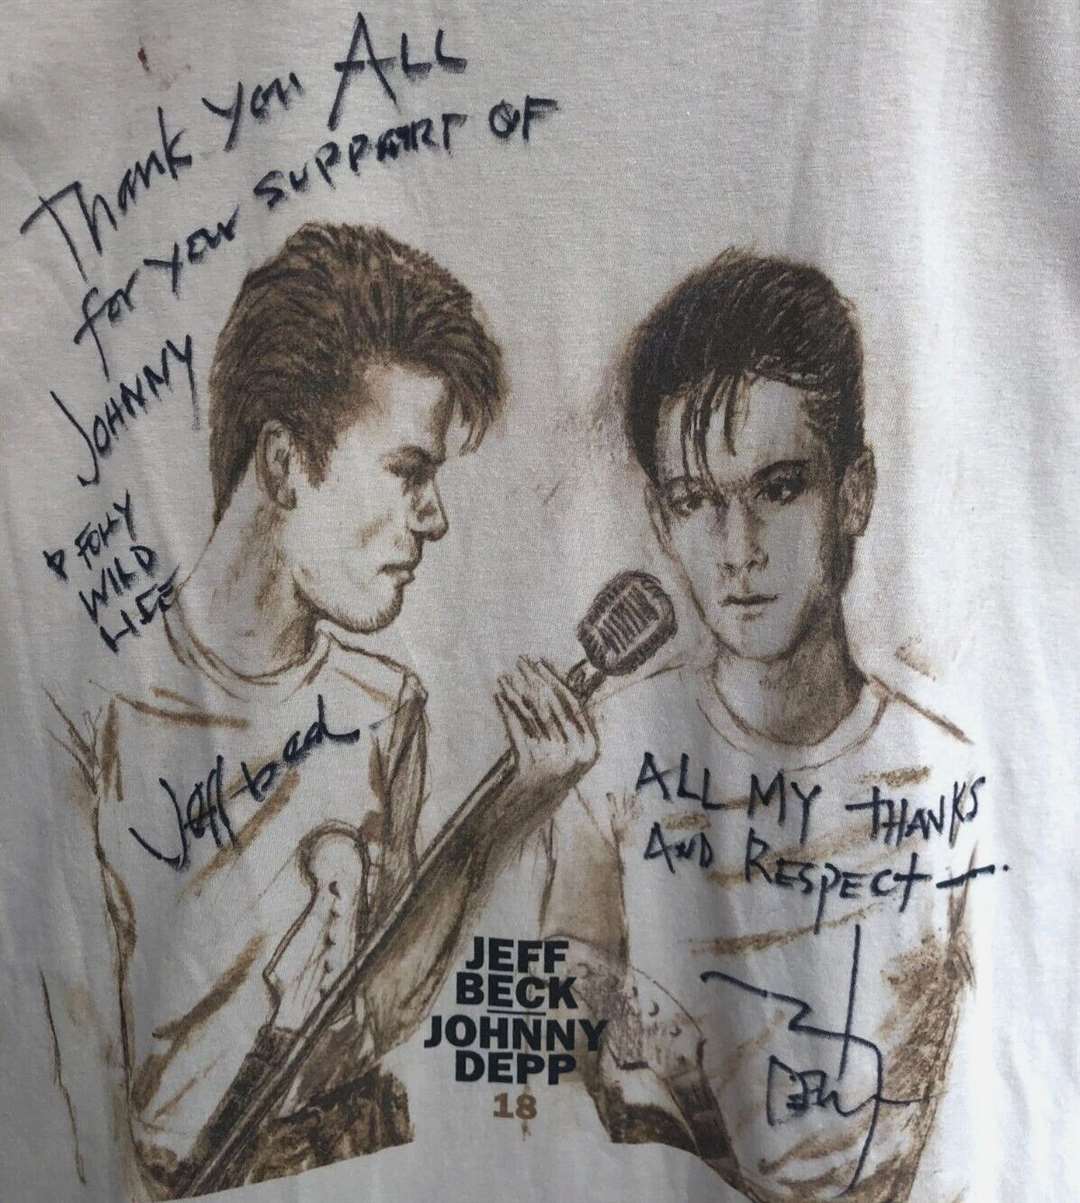 Both Depp and Beck have added a handwritten message on the item. Picture: Folly Wildlife Centre